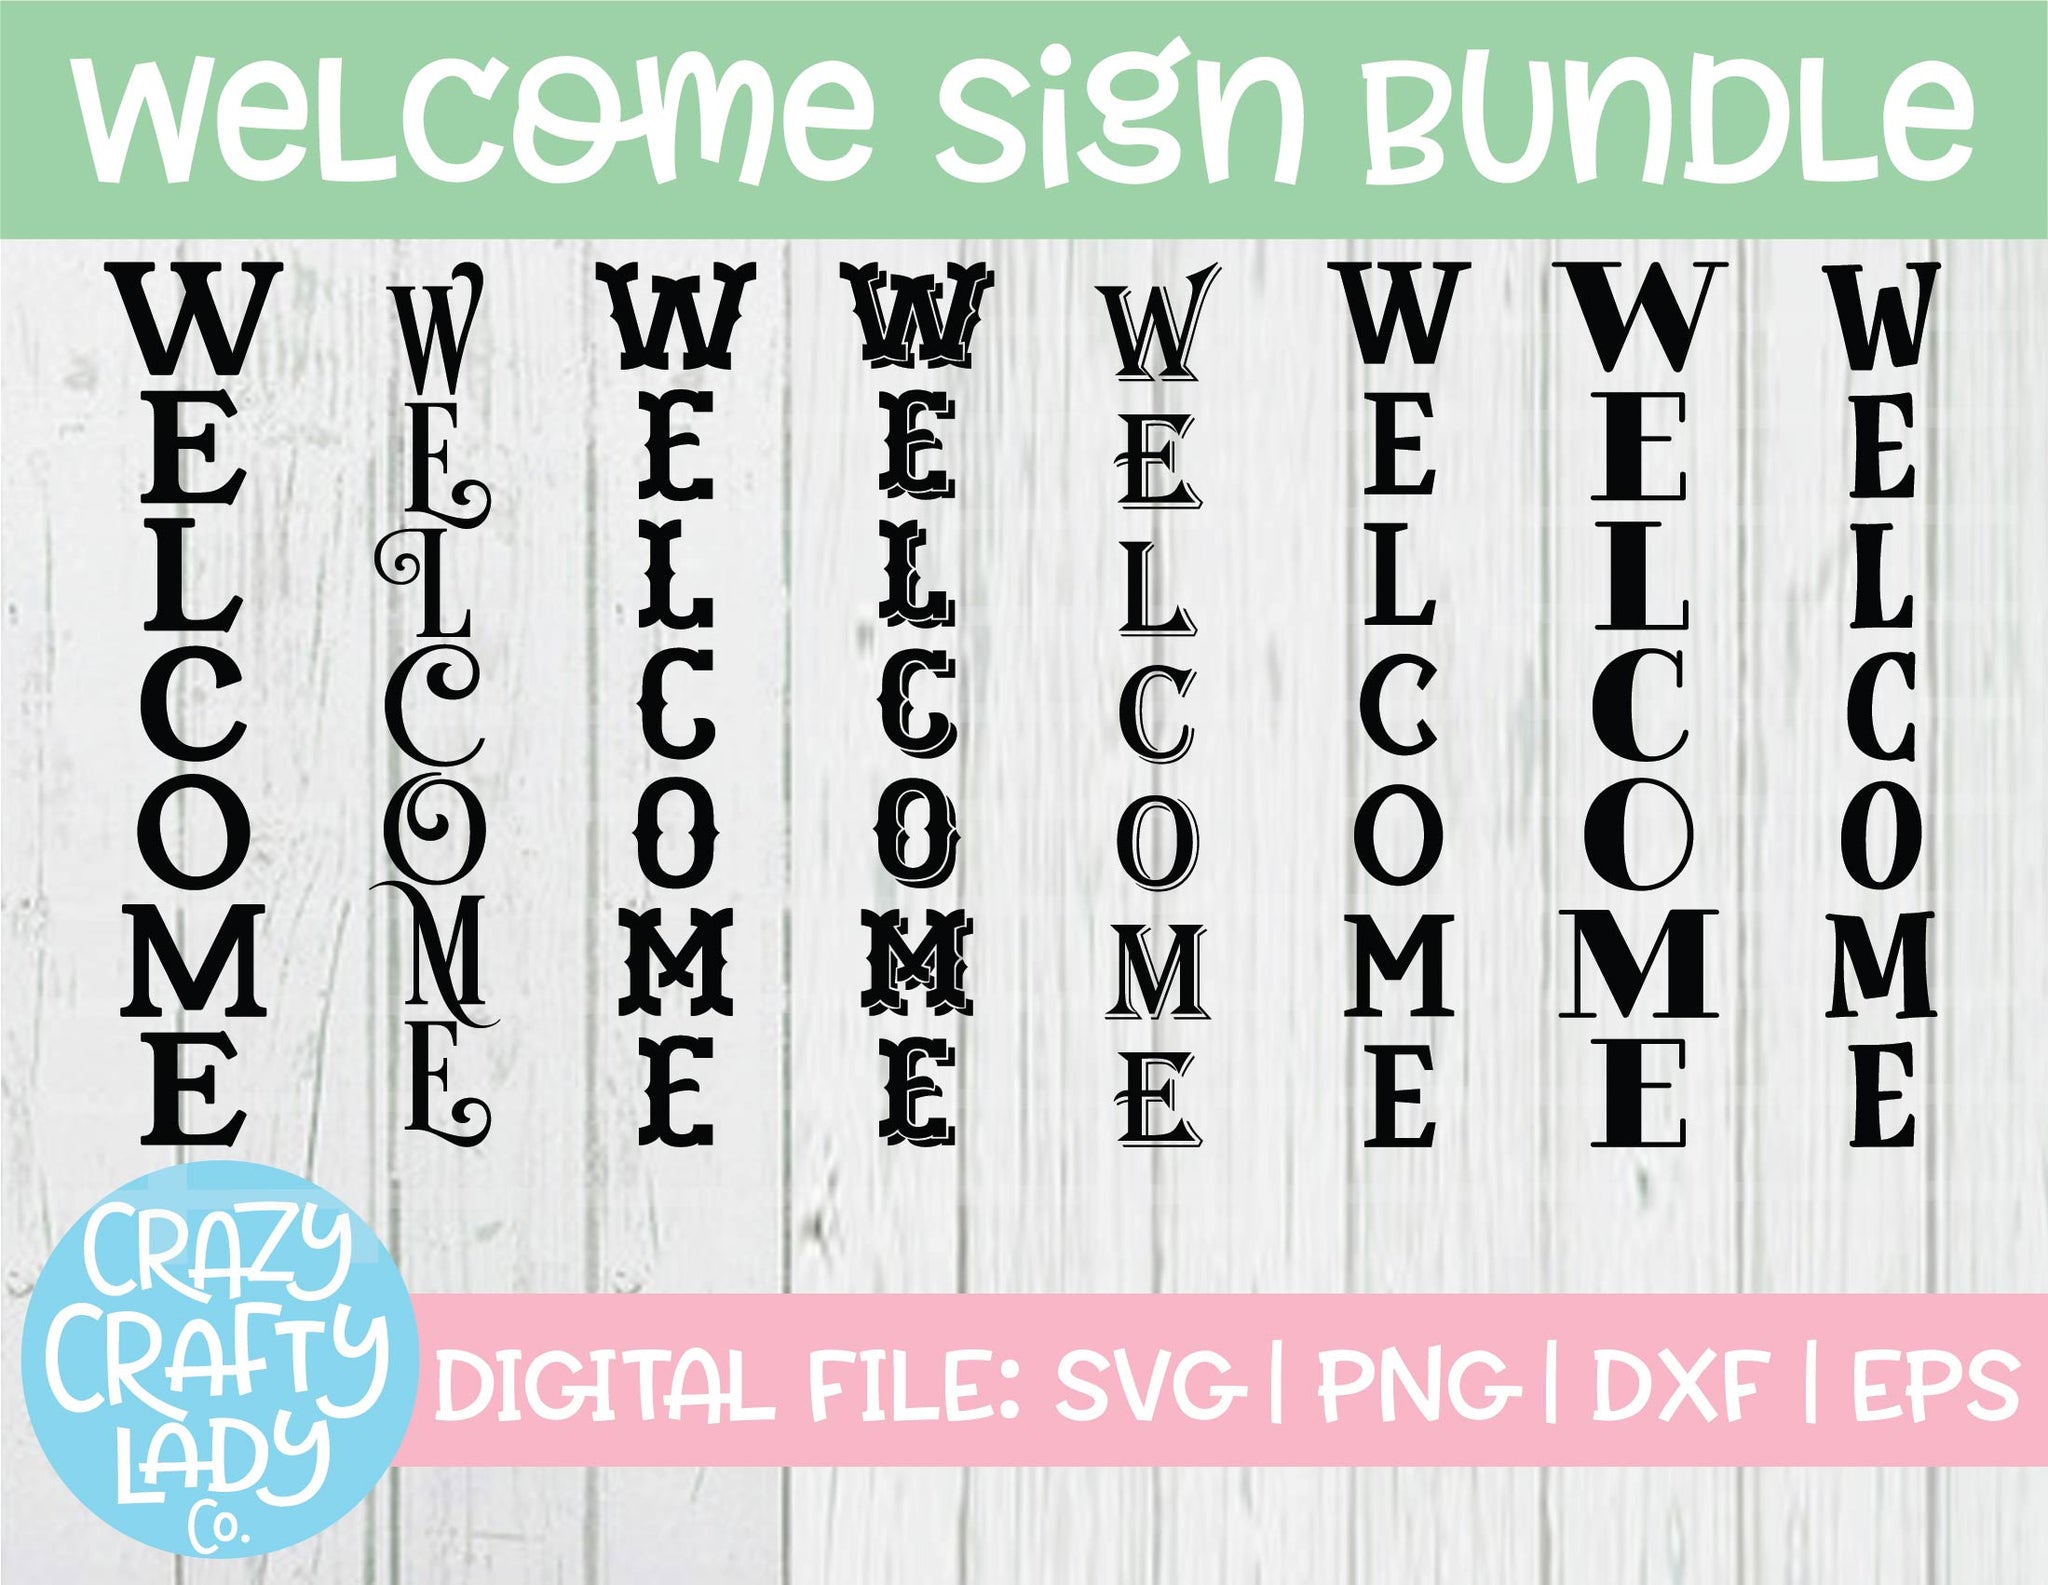 Download Welcome Sign Svg Cut File Bundle Crazy Crafty Lady Co